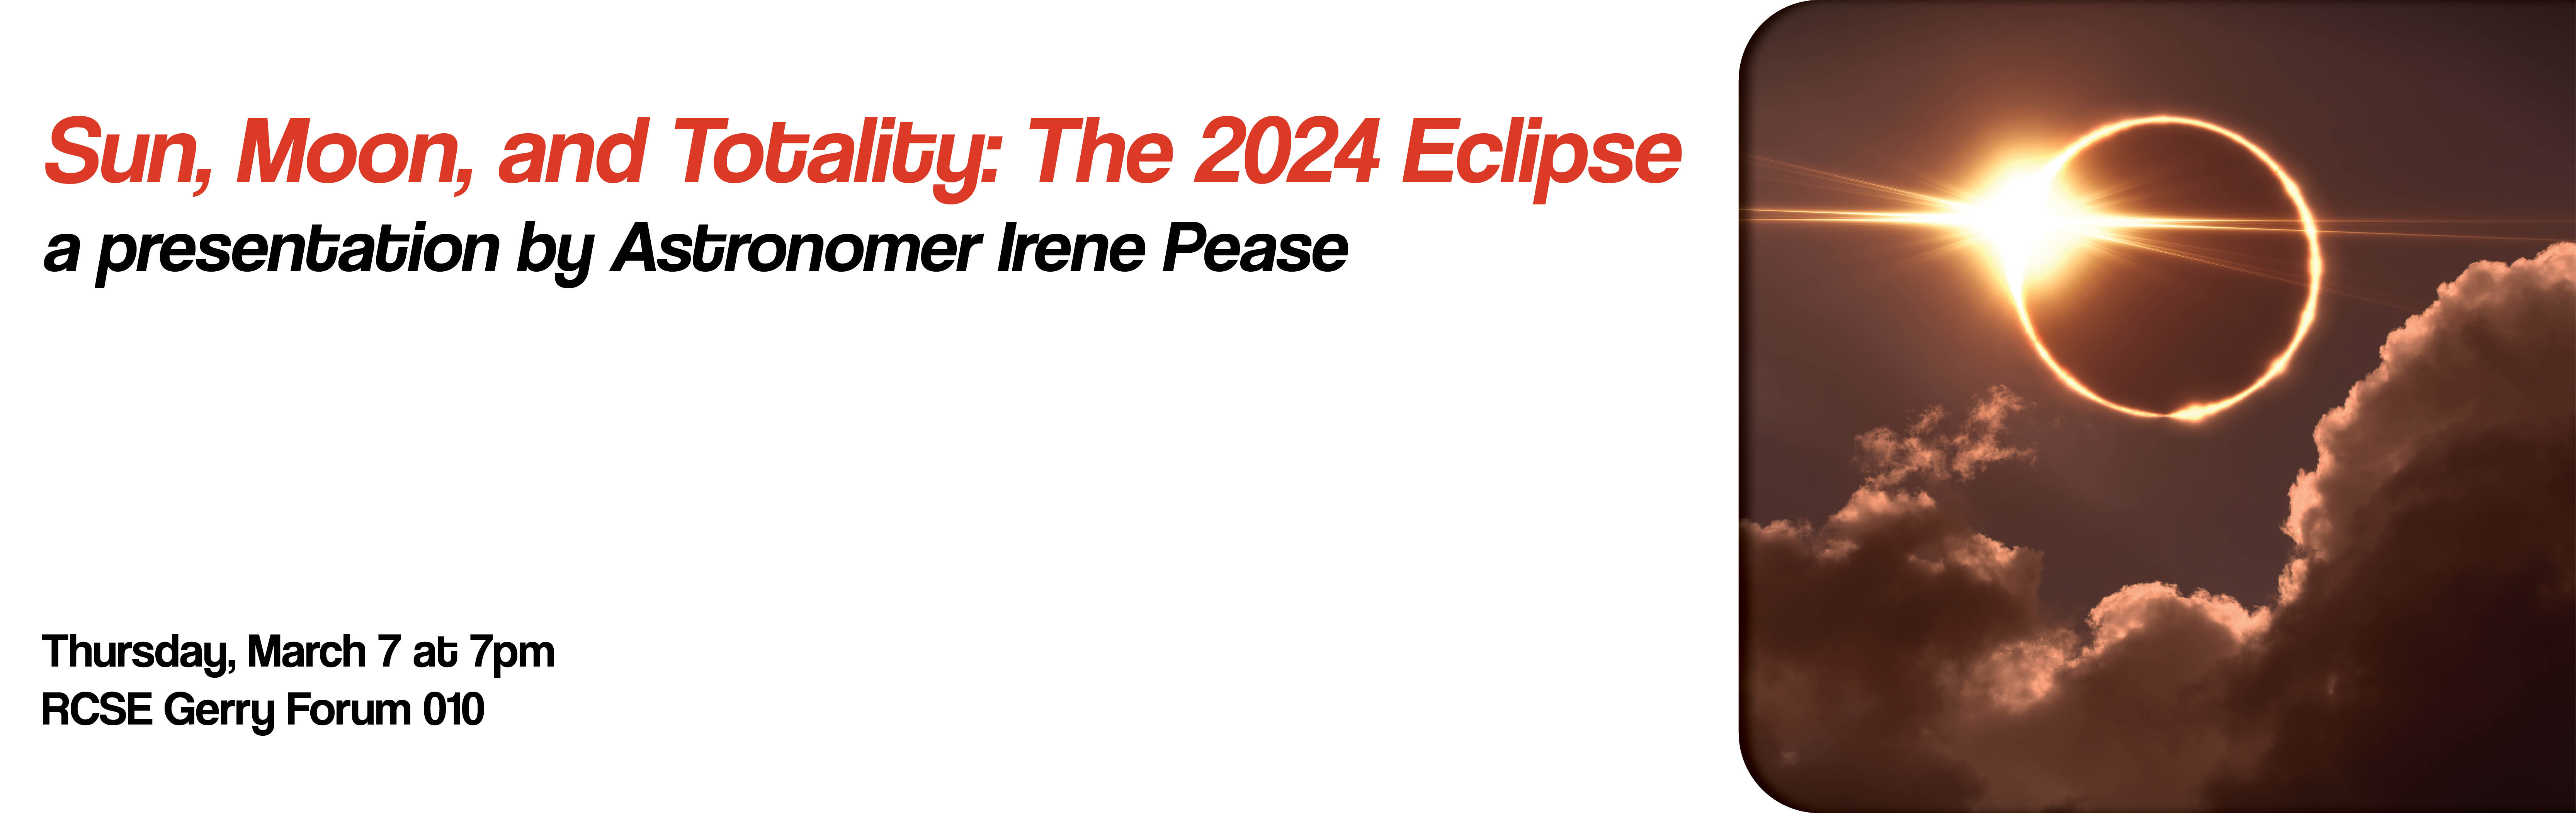 Sun, Moon, and Totality: The 2024 Eclipse